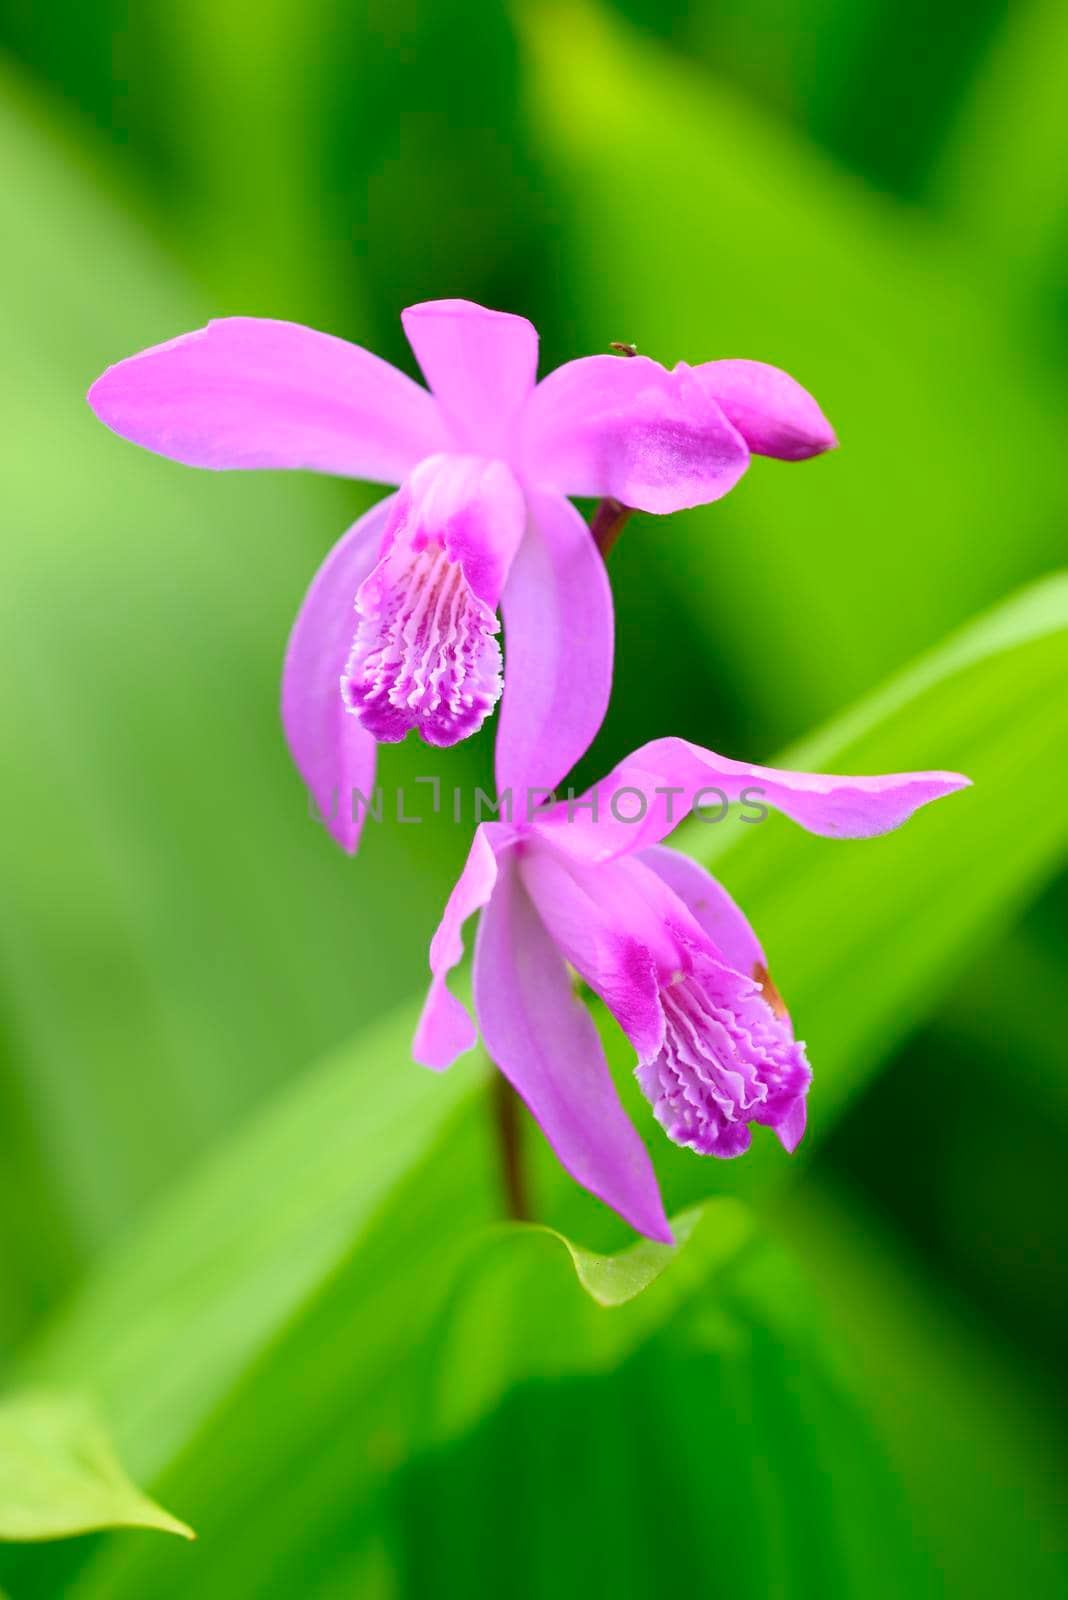 Flowers of China purple orchid, Bletilla striata by AlessandroZocc